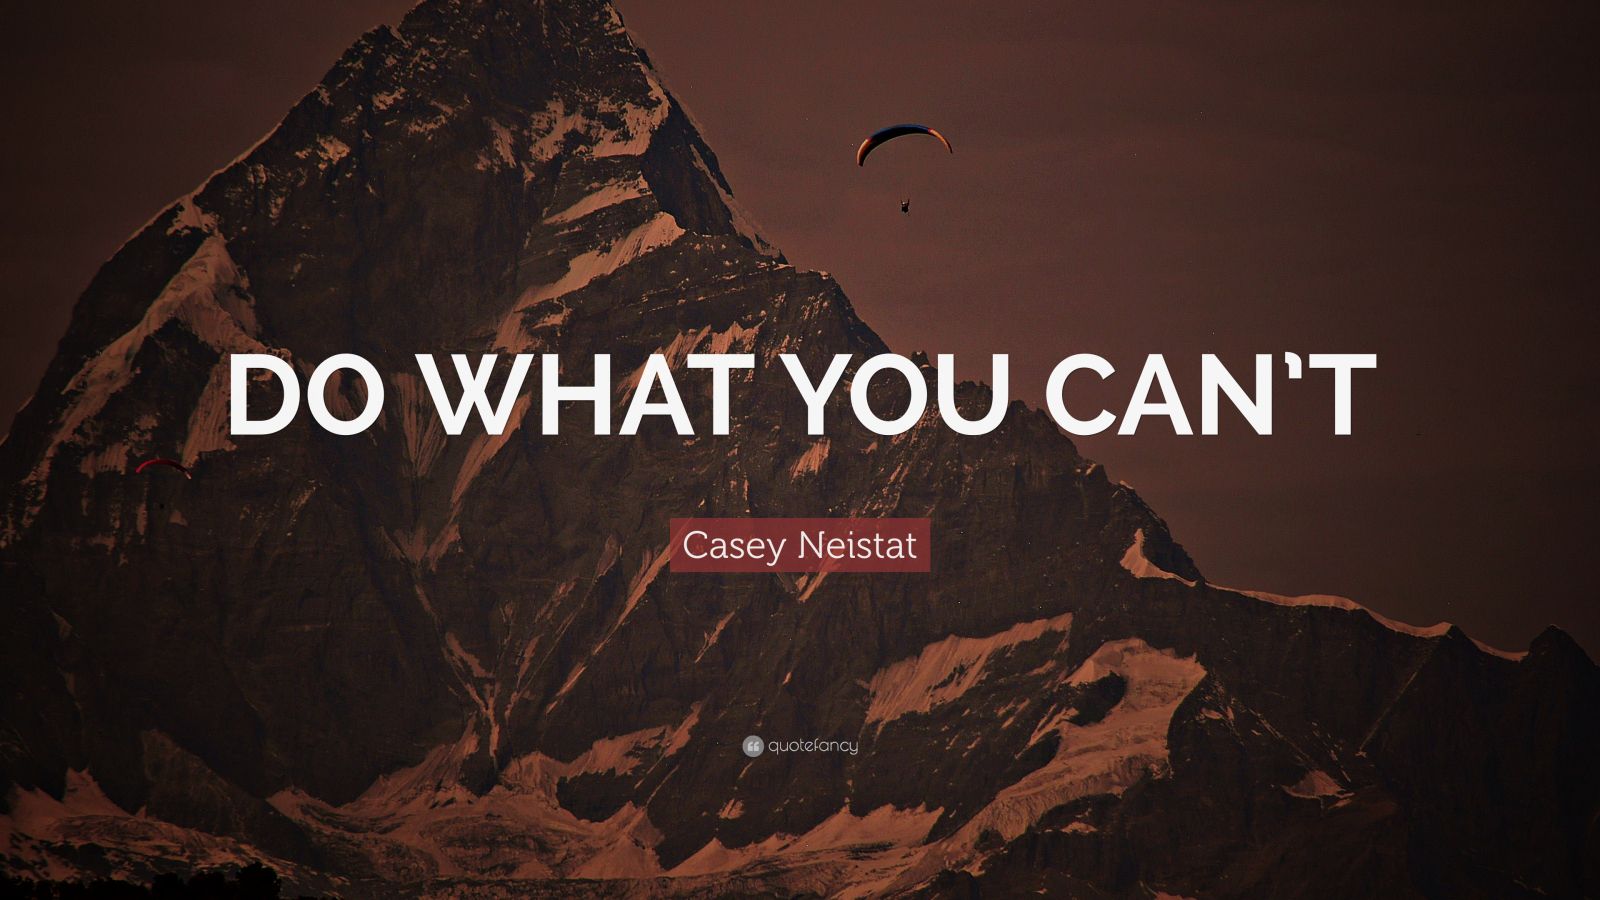 Casey Neistat Quotes - Comfort Zone Quotes Business - HD Wallpaper 